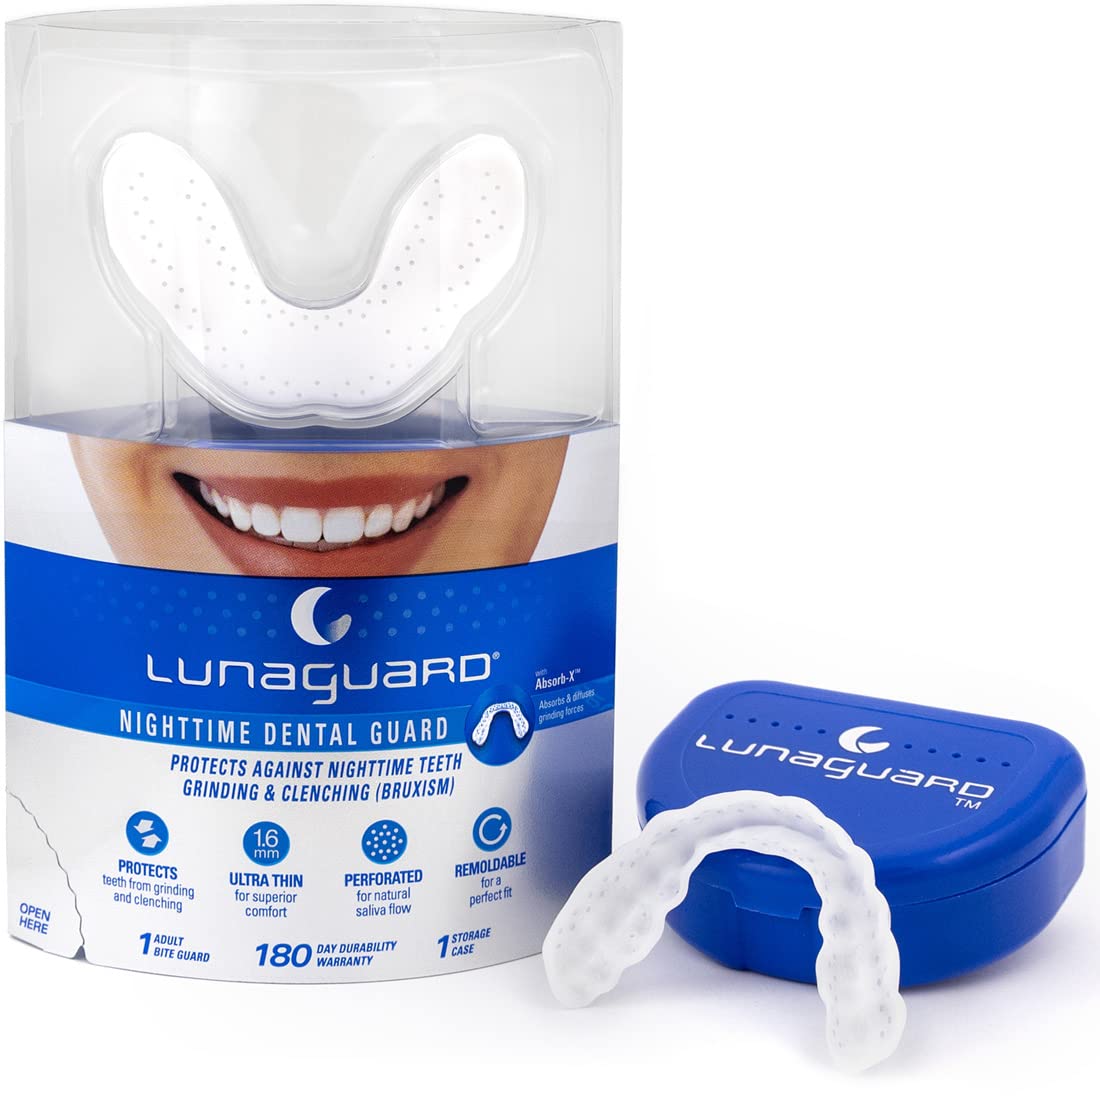 LunaGuard Nighttime Dental Guard – Comfortable Mouth Guard for Bruxism - Custom Fitted Protection for Teeth Grinding and Jaw Clenching Plus Storage Case